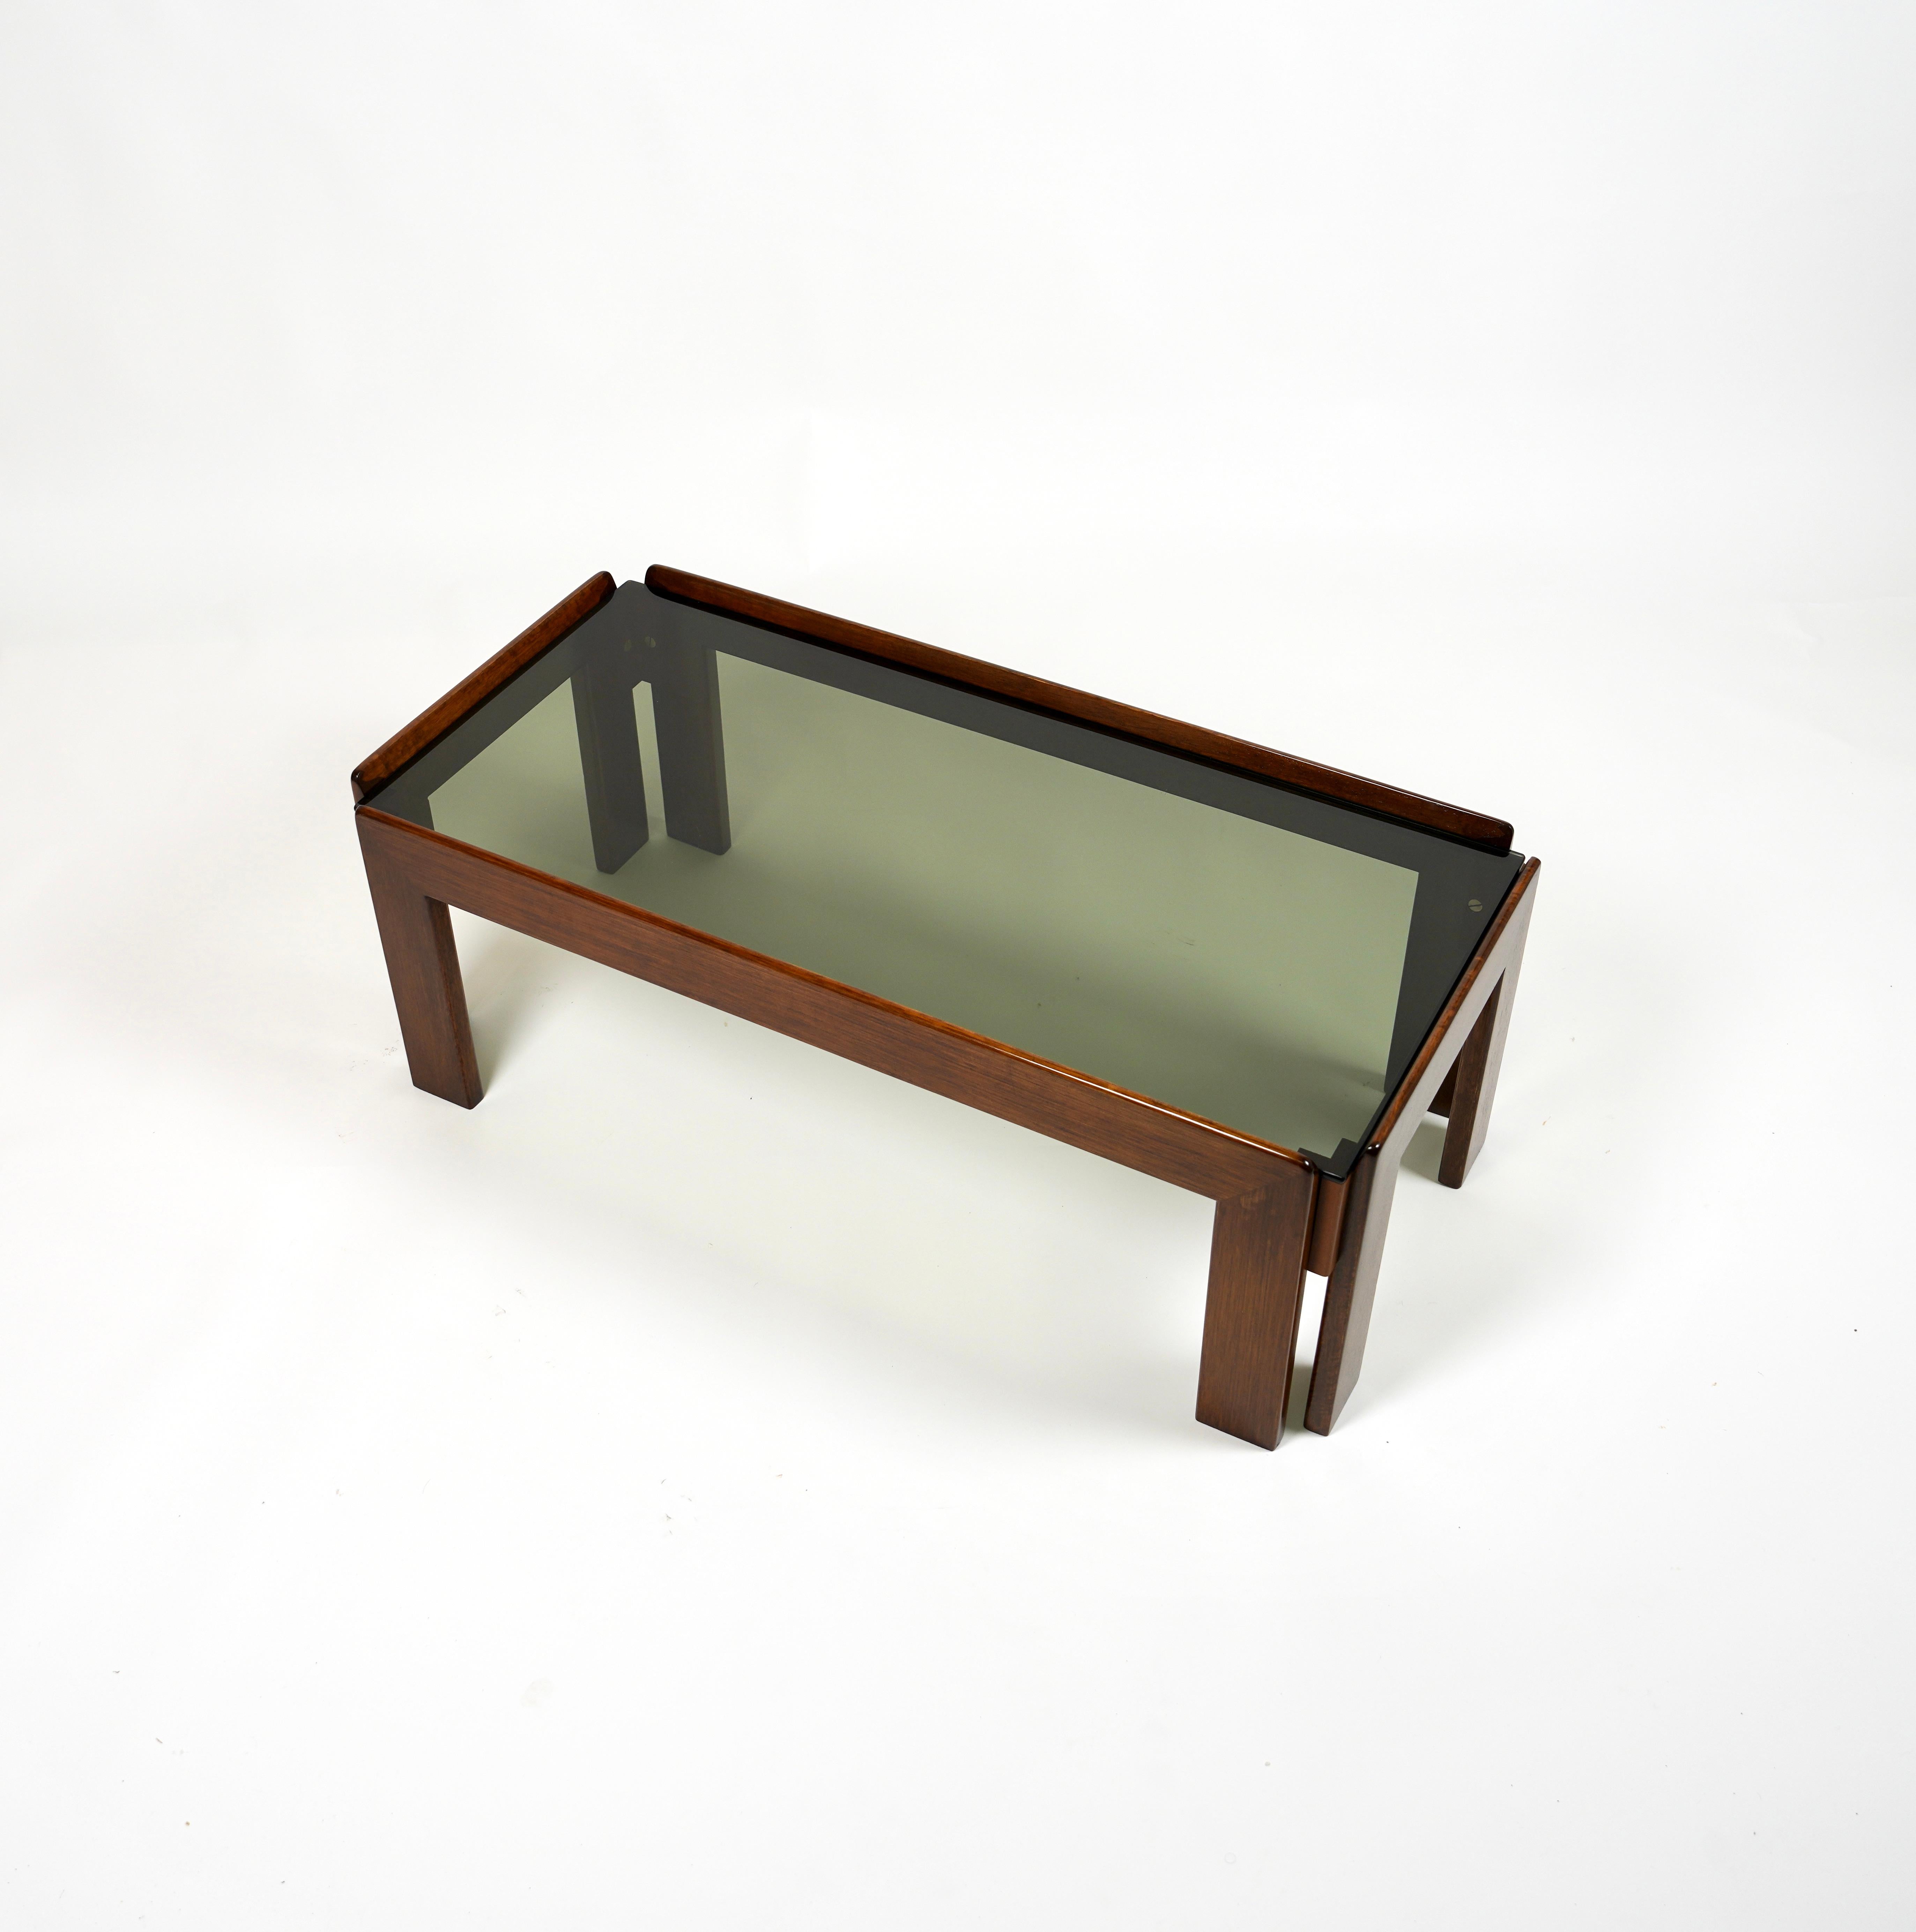 Smoked Glass Coffee Table in Wood and Glass Afra & Tobia Scarpa for Cassina, Italy 1960s For Sale